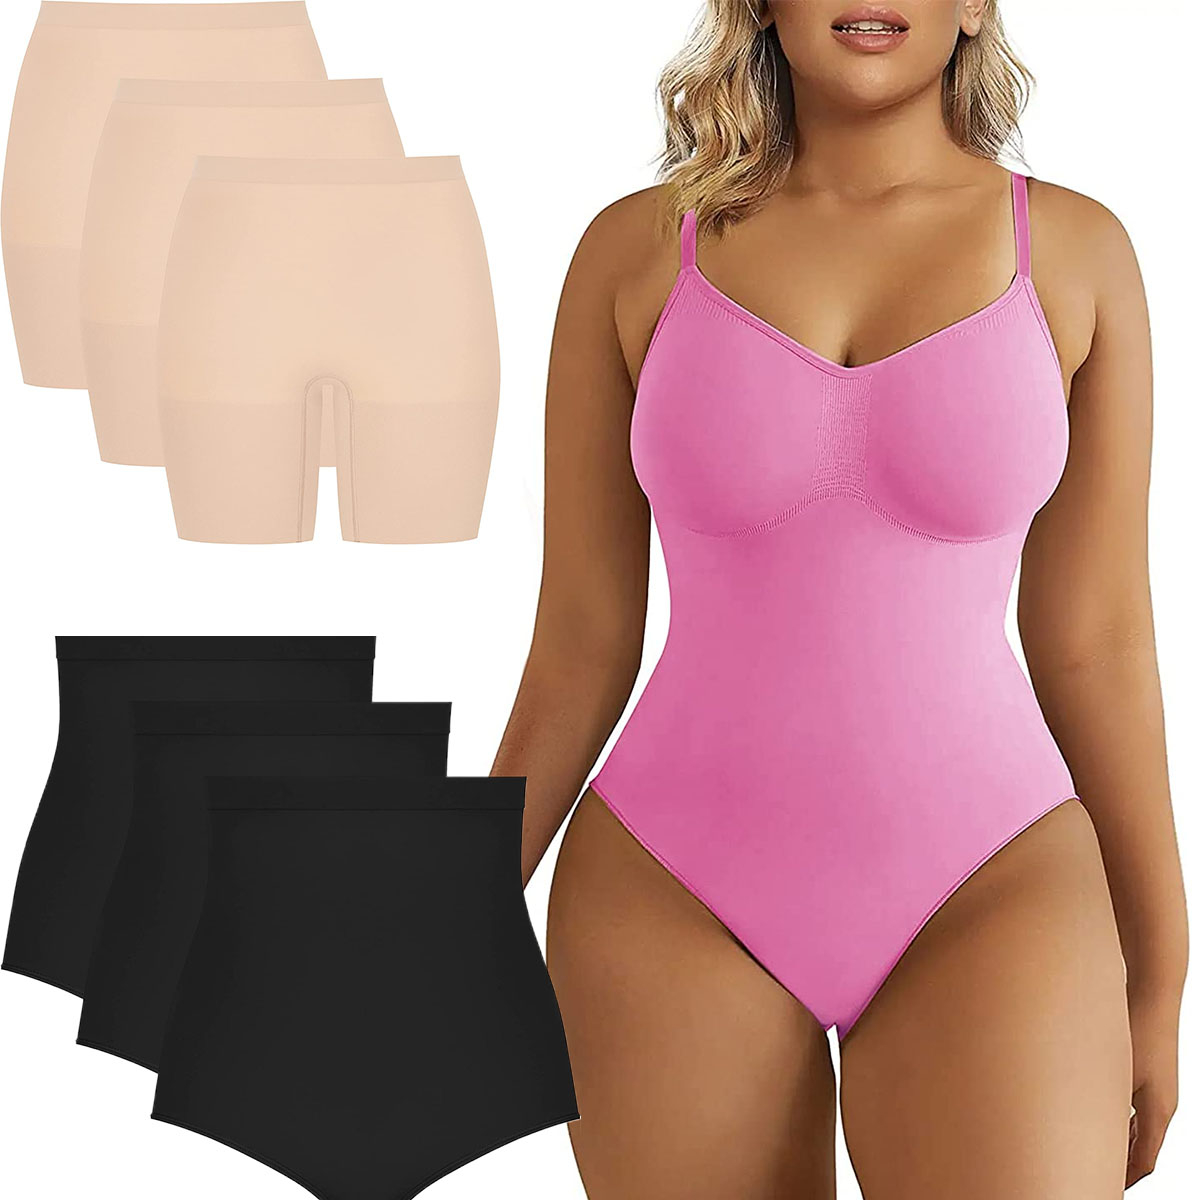 Maidenform® Shapewear: Body Shapers, Body Suits & More